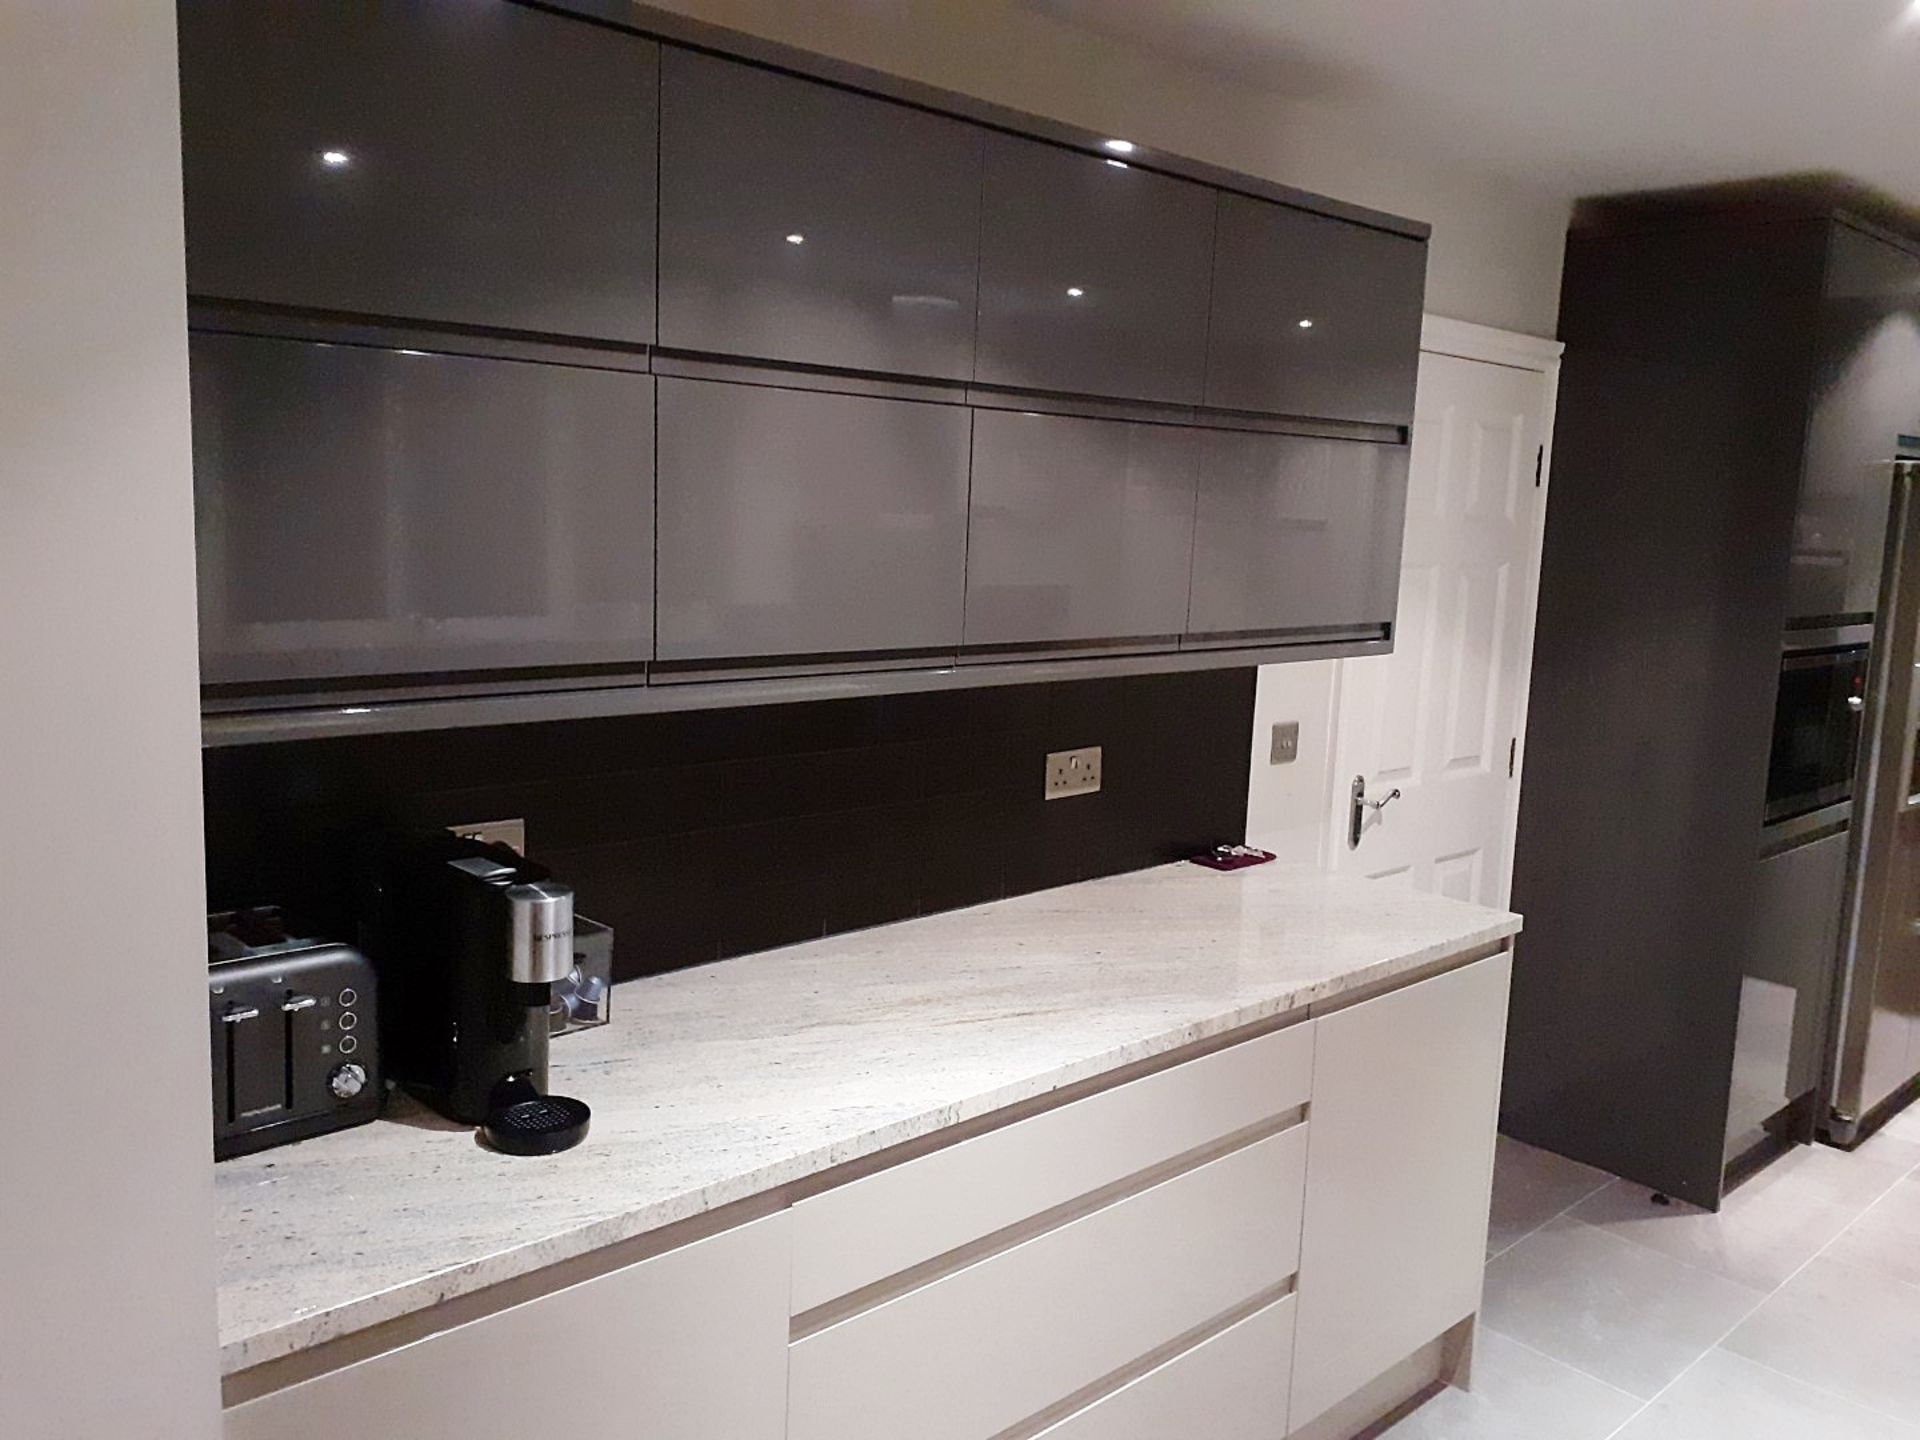 1 x Fitted Kitchen With A Sleek Handleless Design, Integrated Bosch Appliances + Granite Worktops - Image 4 of 69